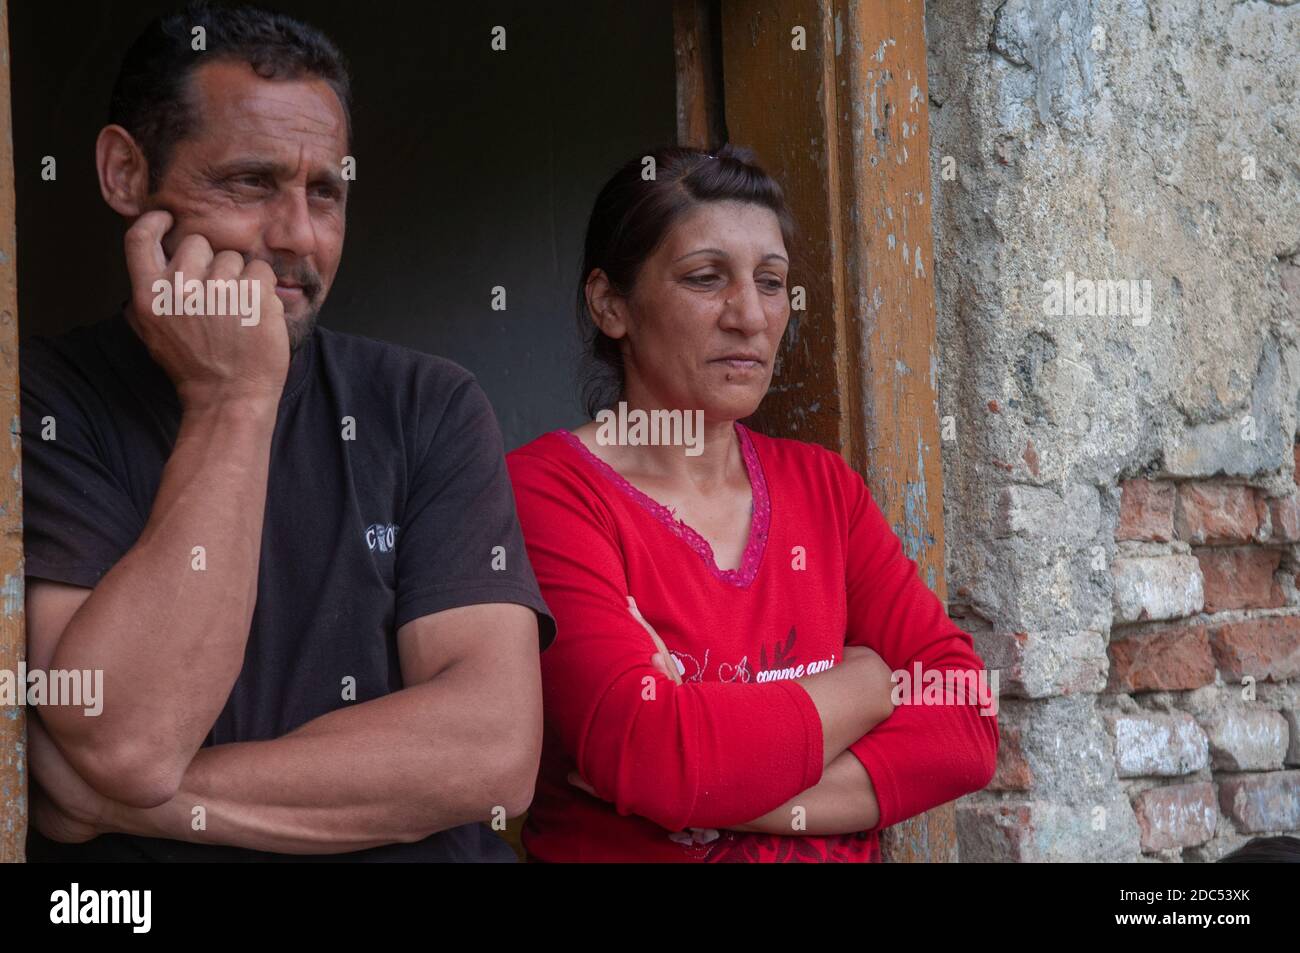 5/16/2018. Lomnicka, Slovakia. Roma or Gypsy community in the heart of Slovakia, living in horrible conditions. They suffer for poverty, stigma and lu Stock Photo